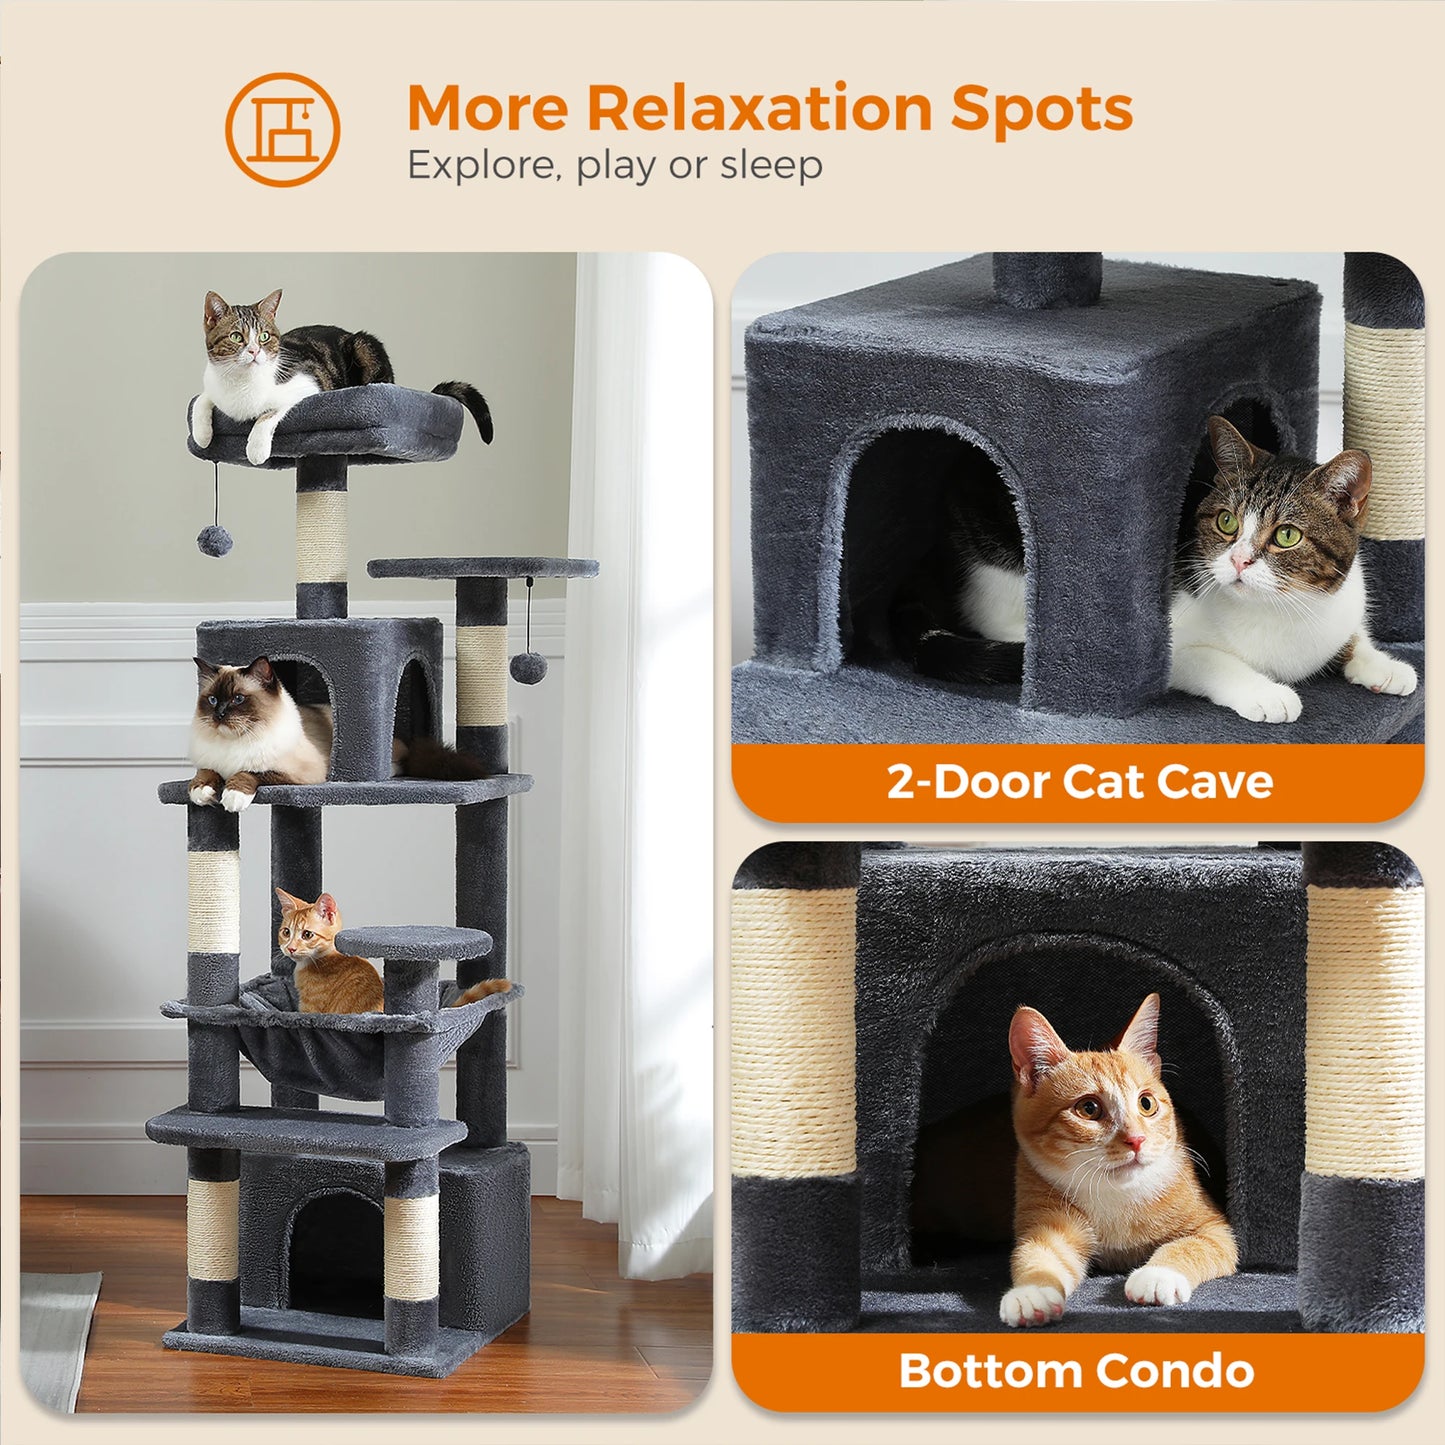 H184CM Large Cat Tower with Sisal Scratching Posts, Condo, Perch, Stable for Kitten Multi-Level Tower